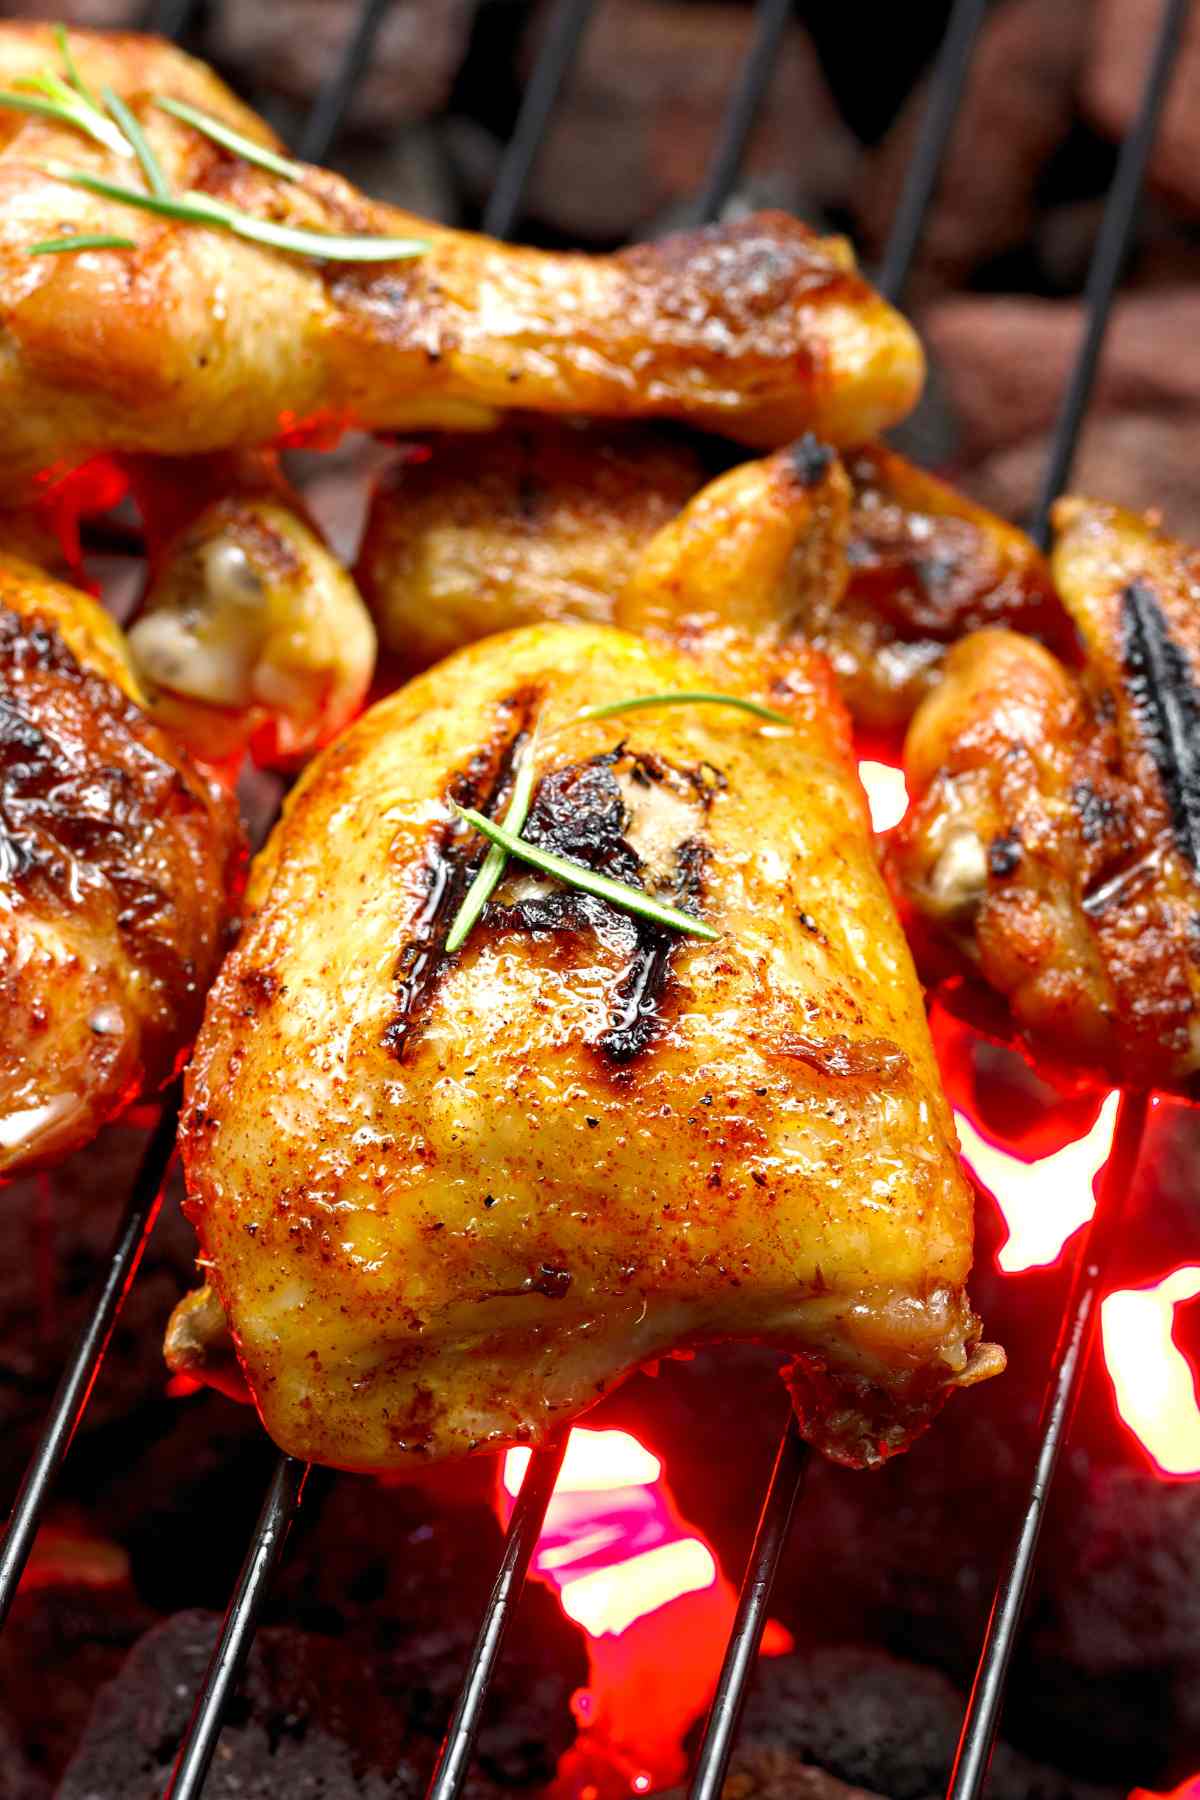 What’s the best temperature to grill chicken? Skip the trip to the grill house and follow these tips for making the tastiest grilled chicken at home!